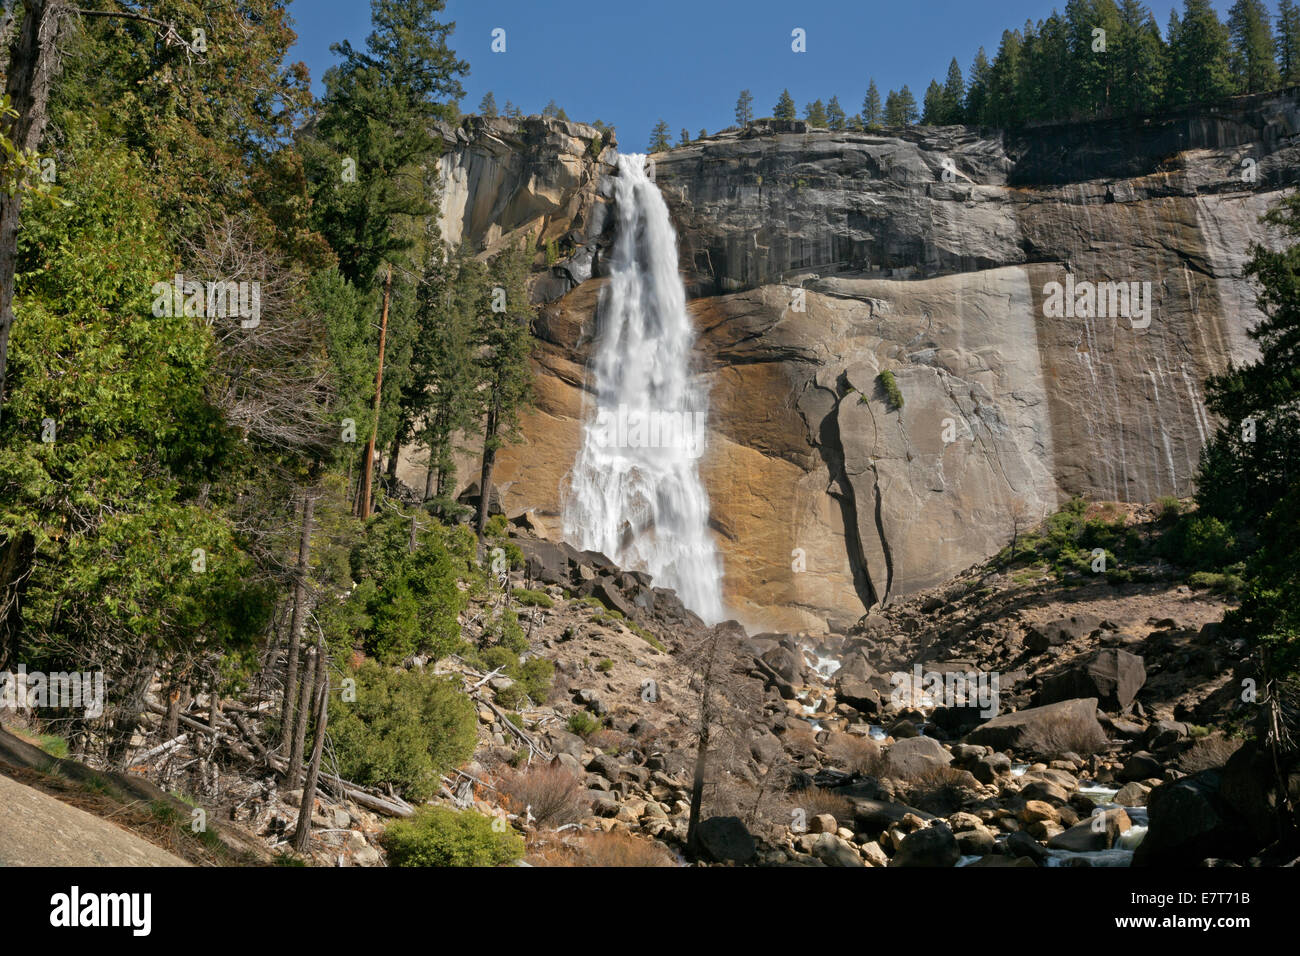 CA02309-00...CALIFORNIA - Nevada Fall on the Merced River from the Mist Trail in Yosemite National Park. Stock Photo